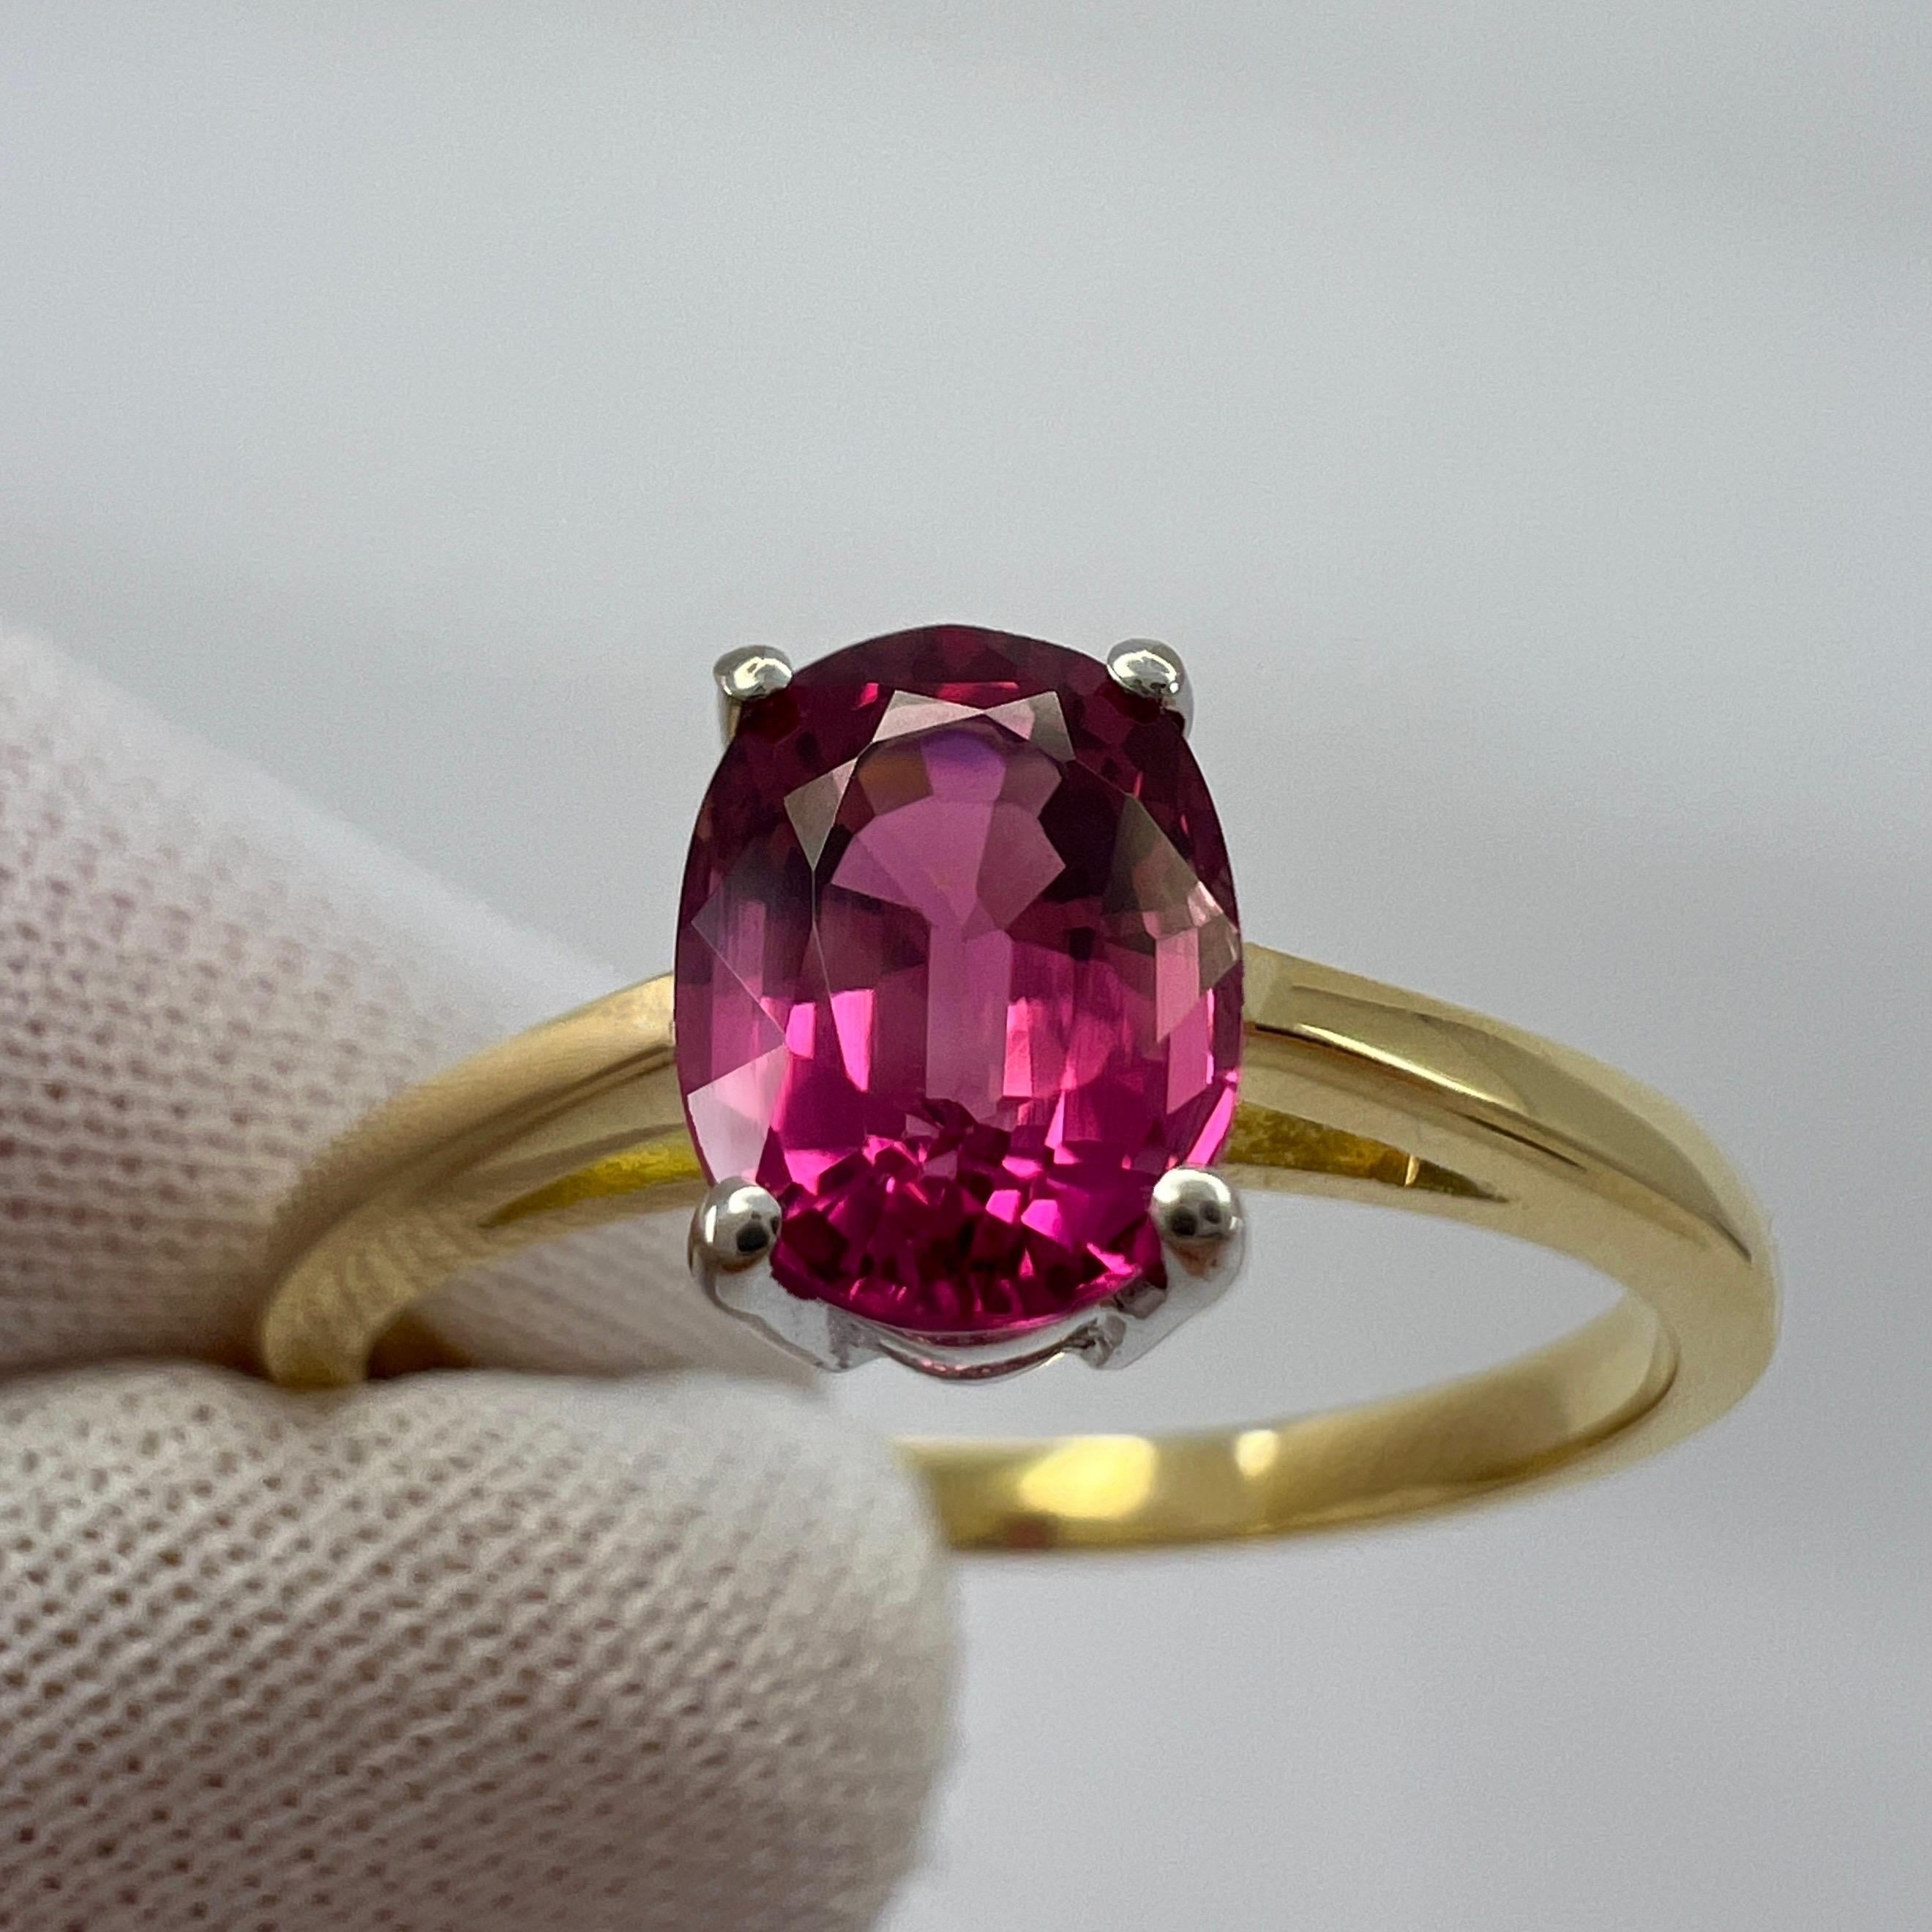 Women's 1.10ct Vivid Pink Purple Rubellite Tourmaline Oval Cut 18k Gold Solitaire Ring For Sale